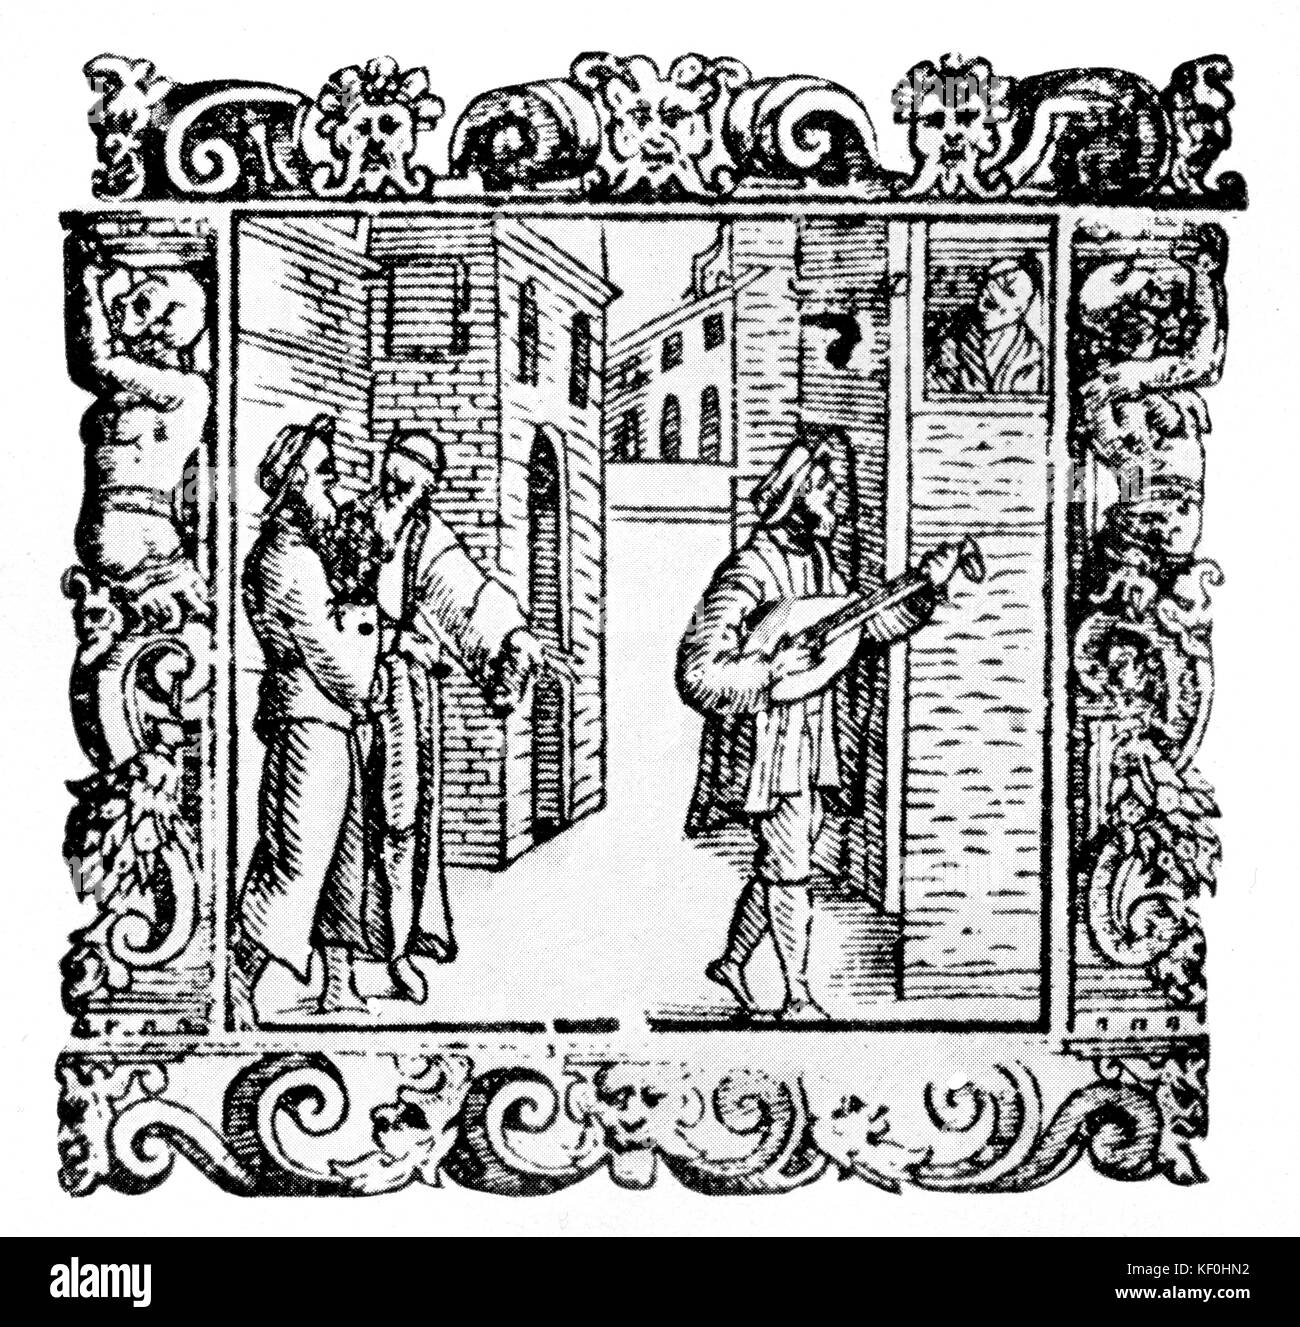 'L' Amfiparnaso' by Orazio Vecchi, a madrigal comedy of 1597.  Image showing the characters Gratiano, Pantalone and Francatrippa from the 1610 edition of 'L' Amfiparnaso'.  OV Italian Composer 6 December 1550 - 19 February 1605. Stock Photo